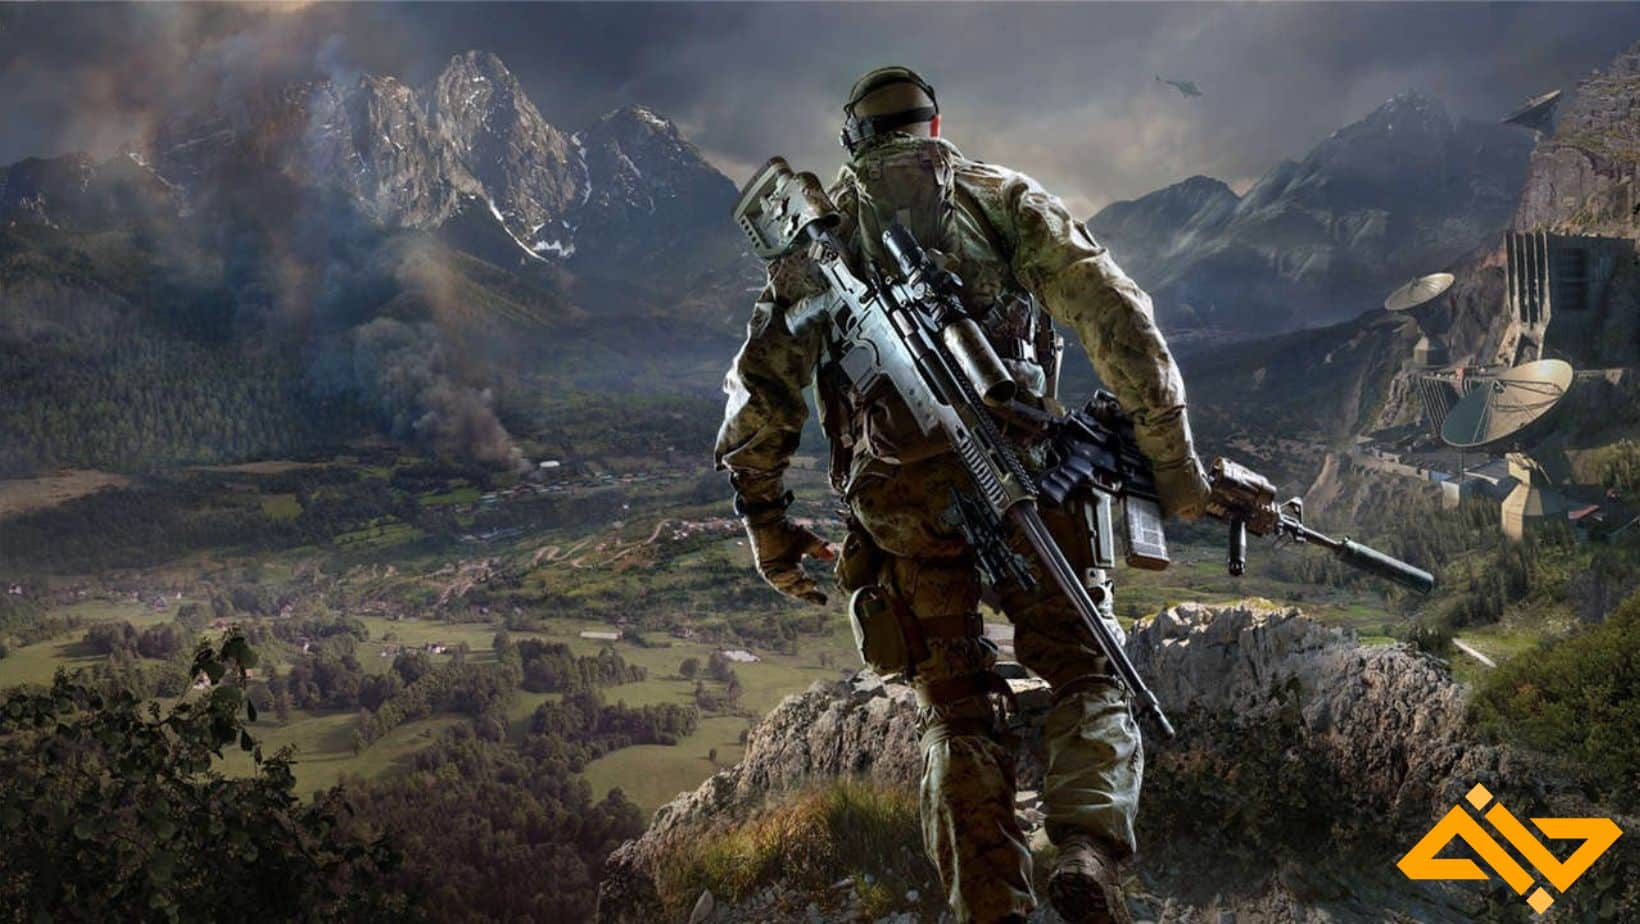 Ghost Warrior 3 fixes one of the most annoying issues from the previous game which was the AI.